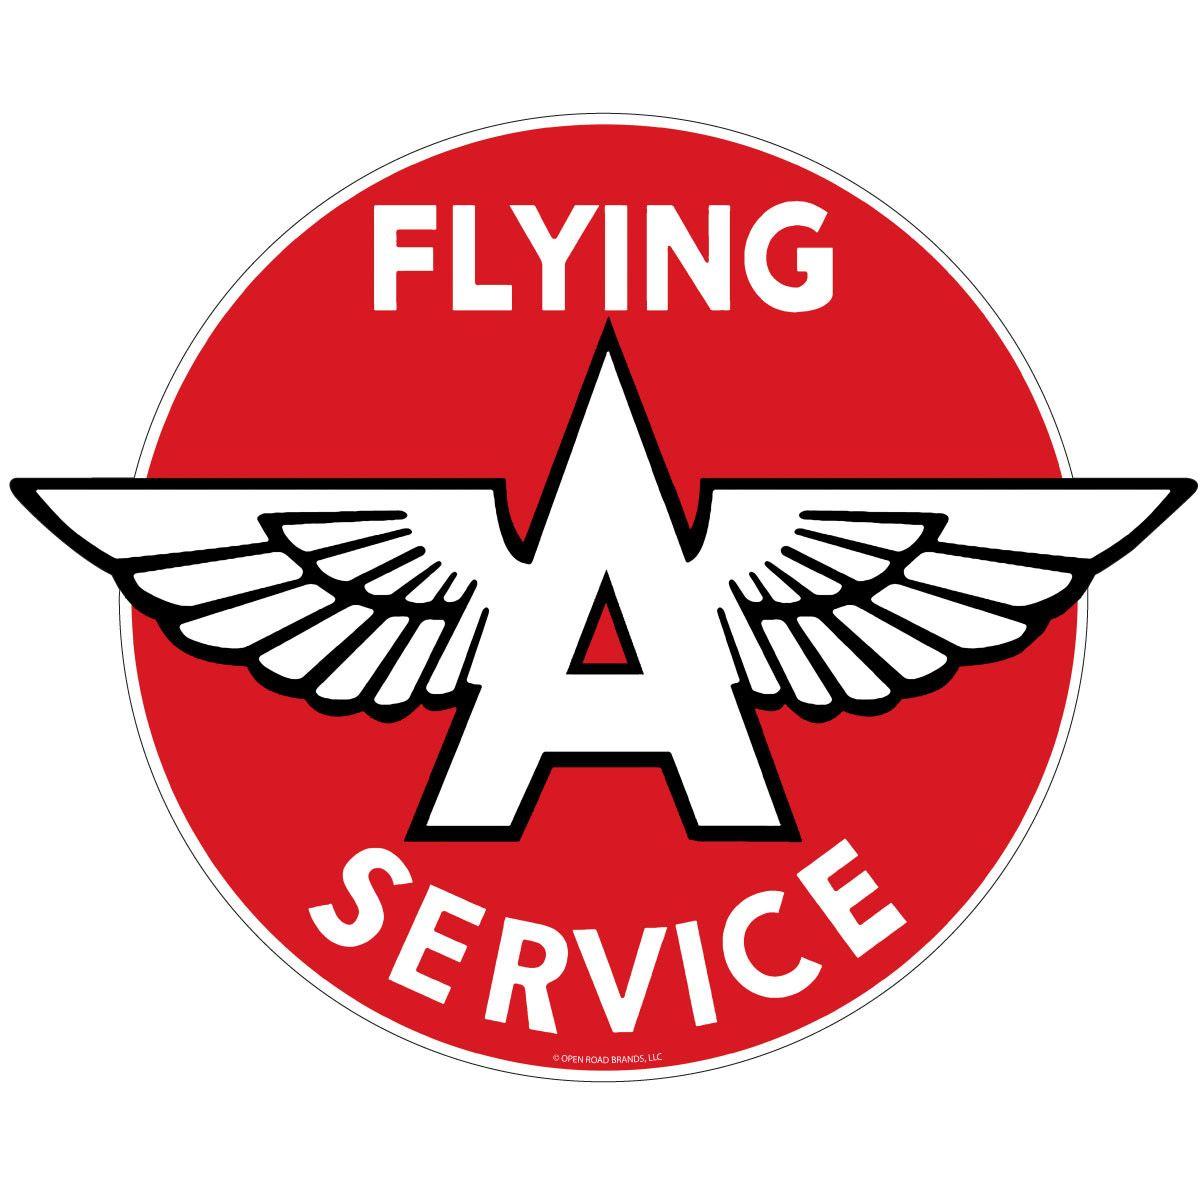 Flying a Gas Logo - Flying A Service Gas Station Wall Decal at Retro Planet